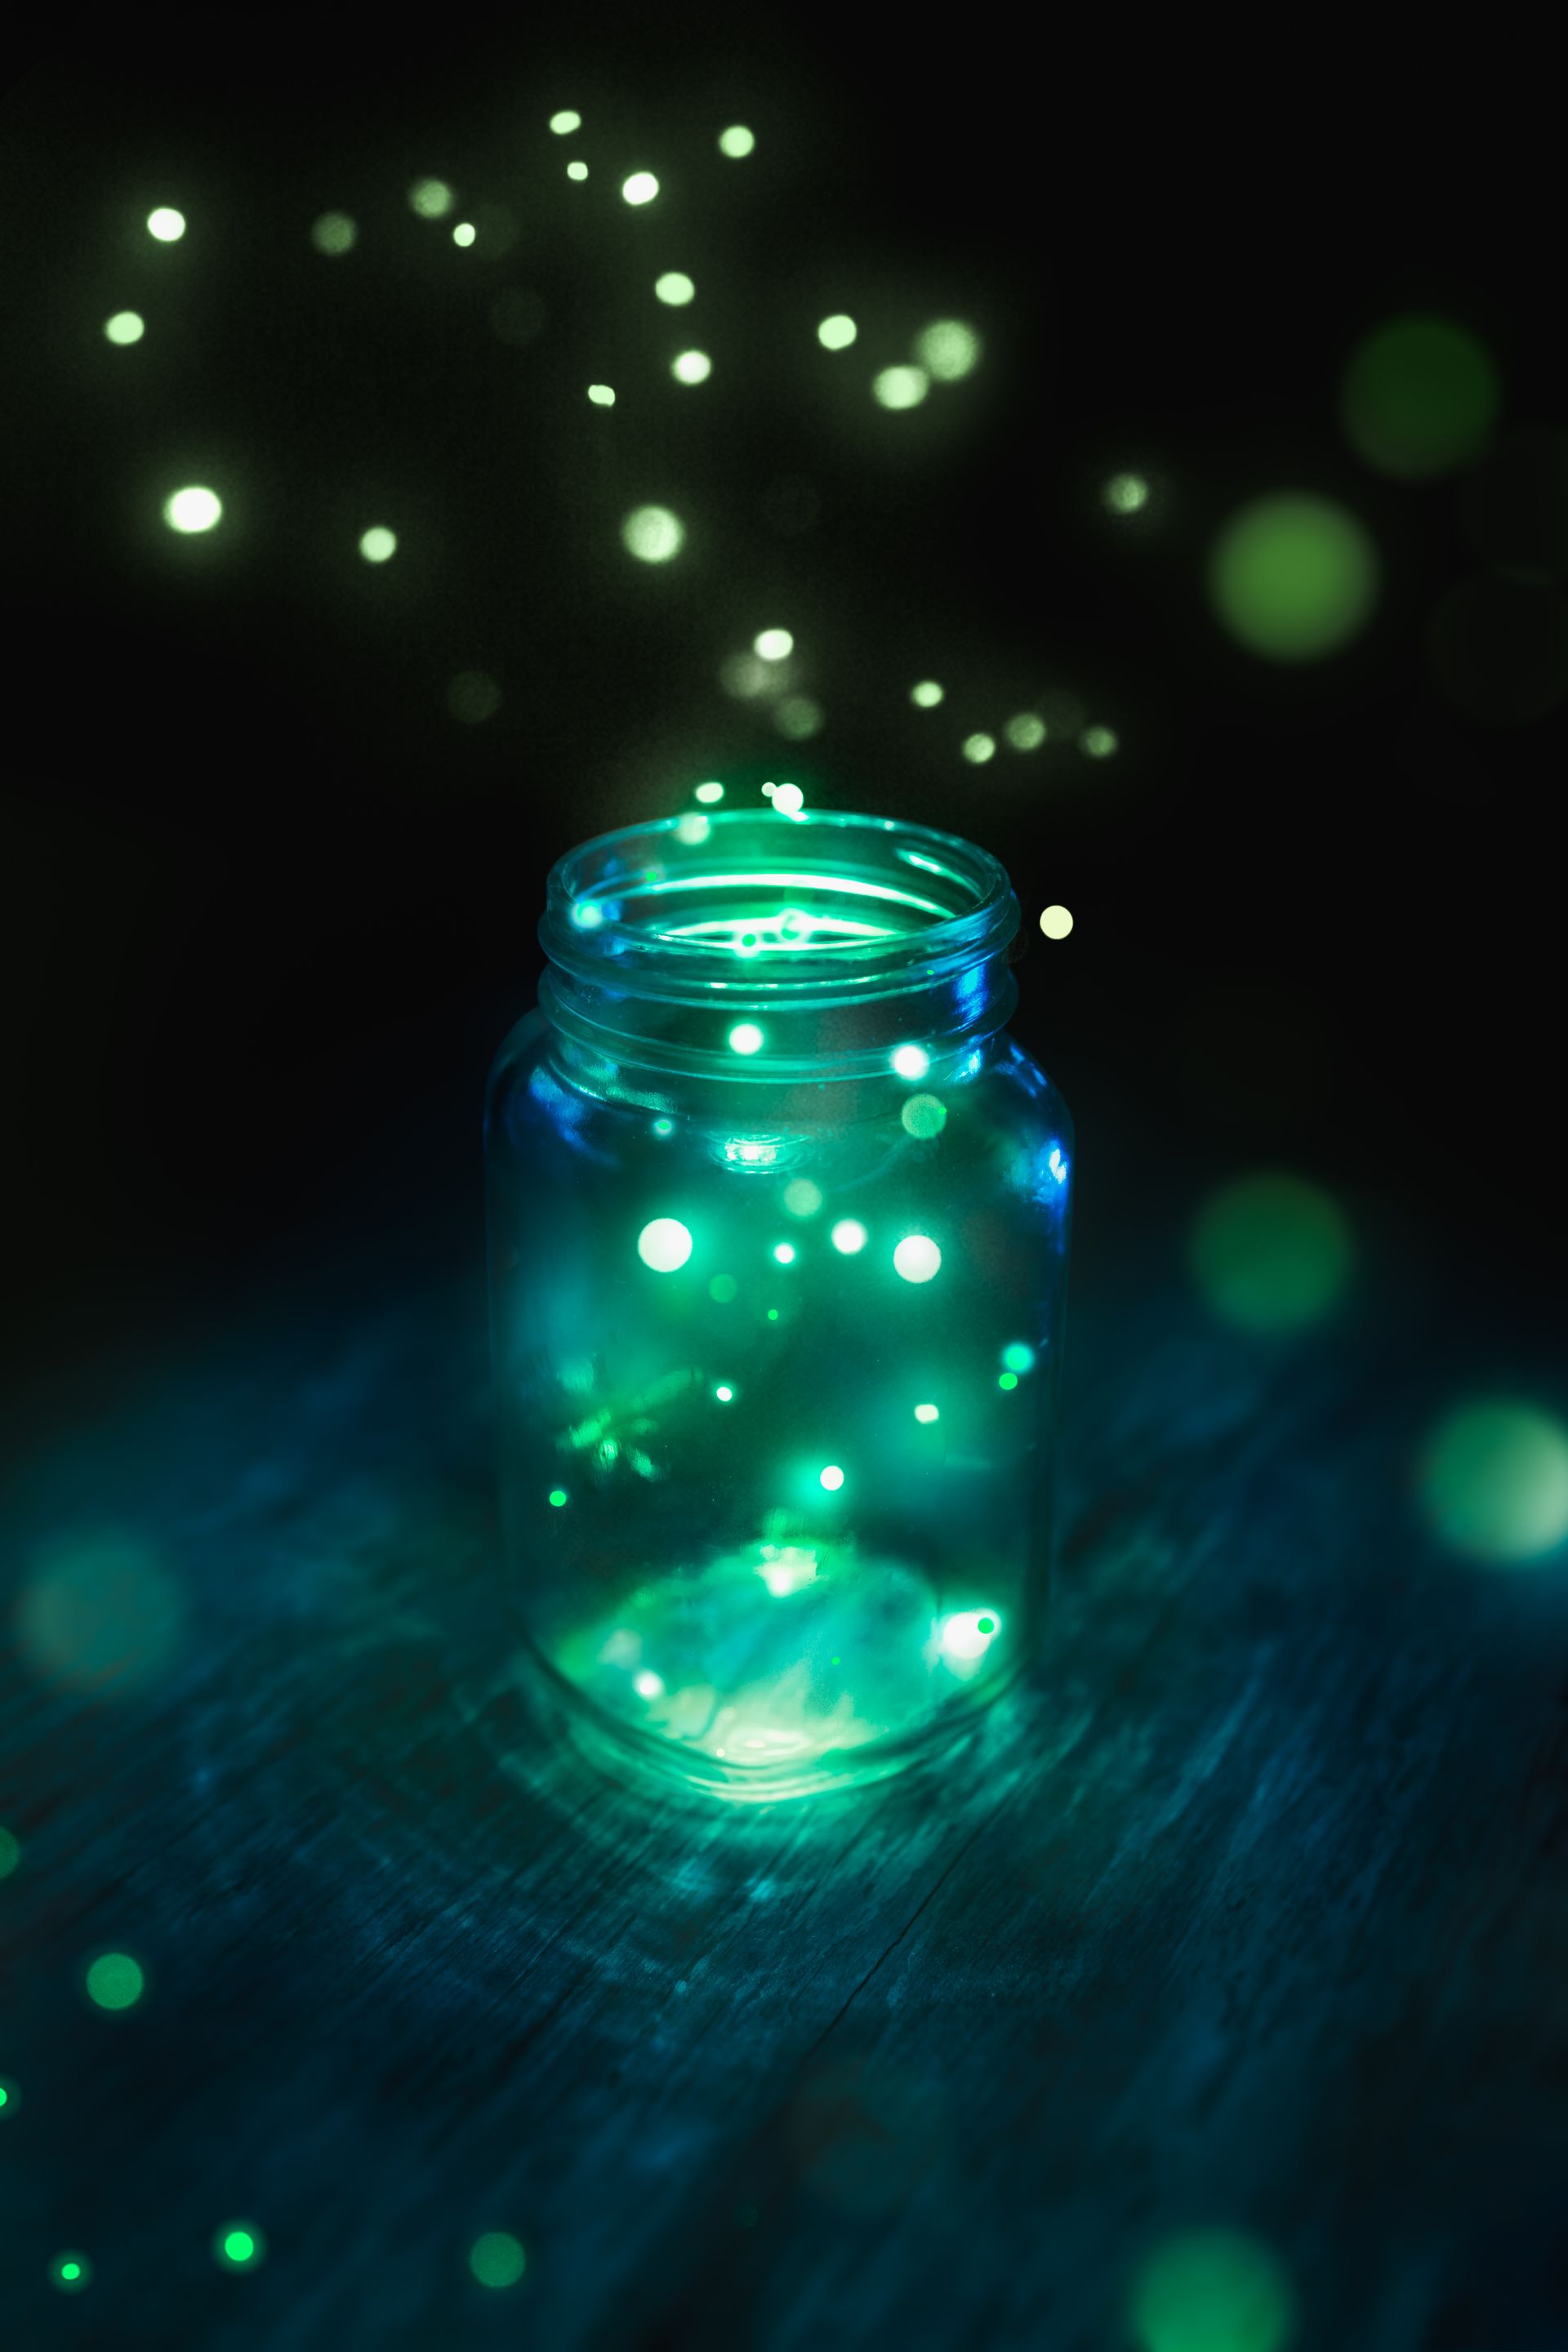 Fireflies captures in a jar on a dark wood background at night